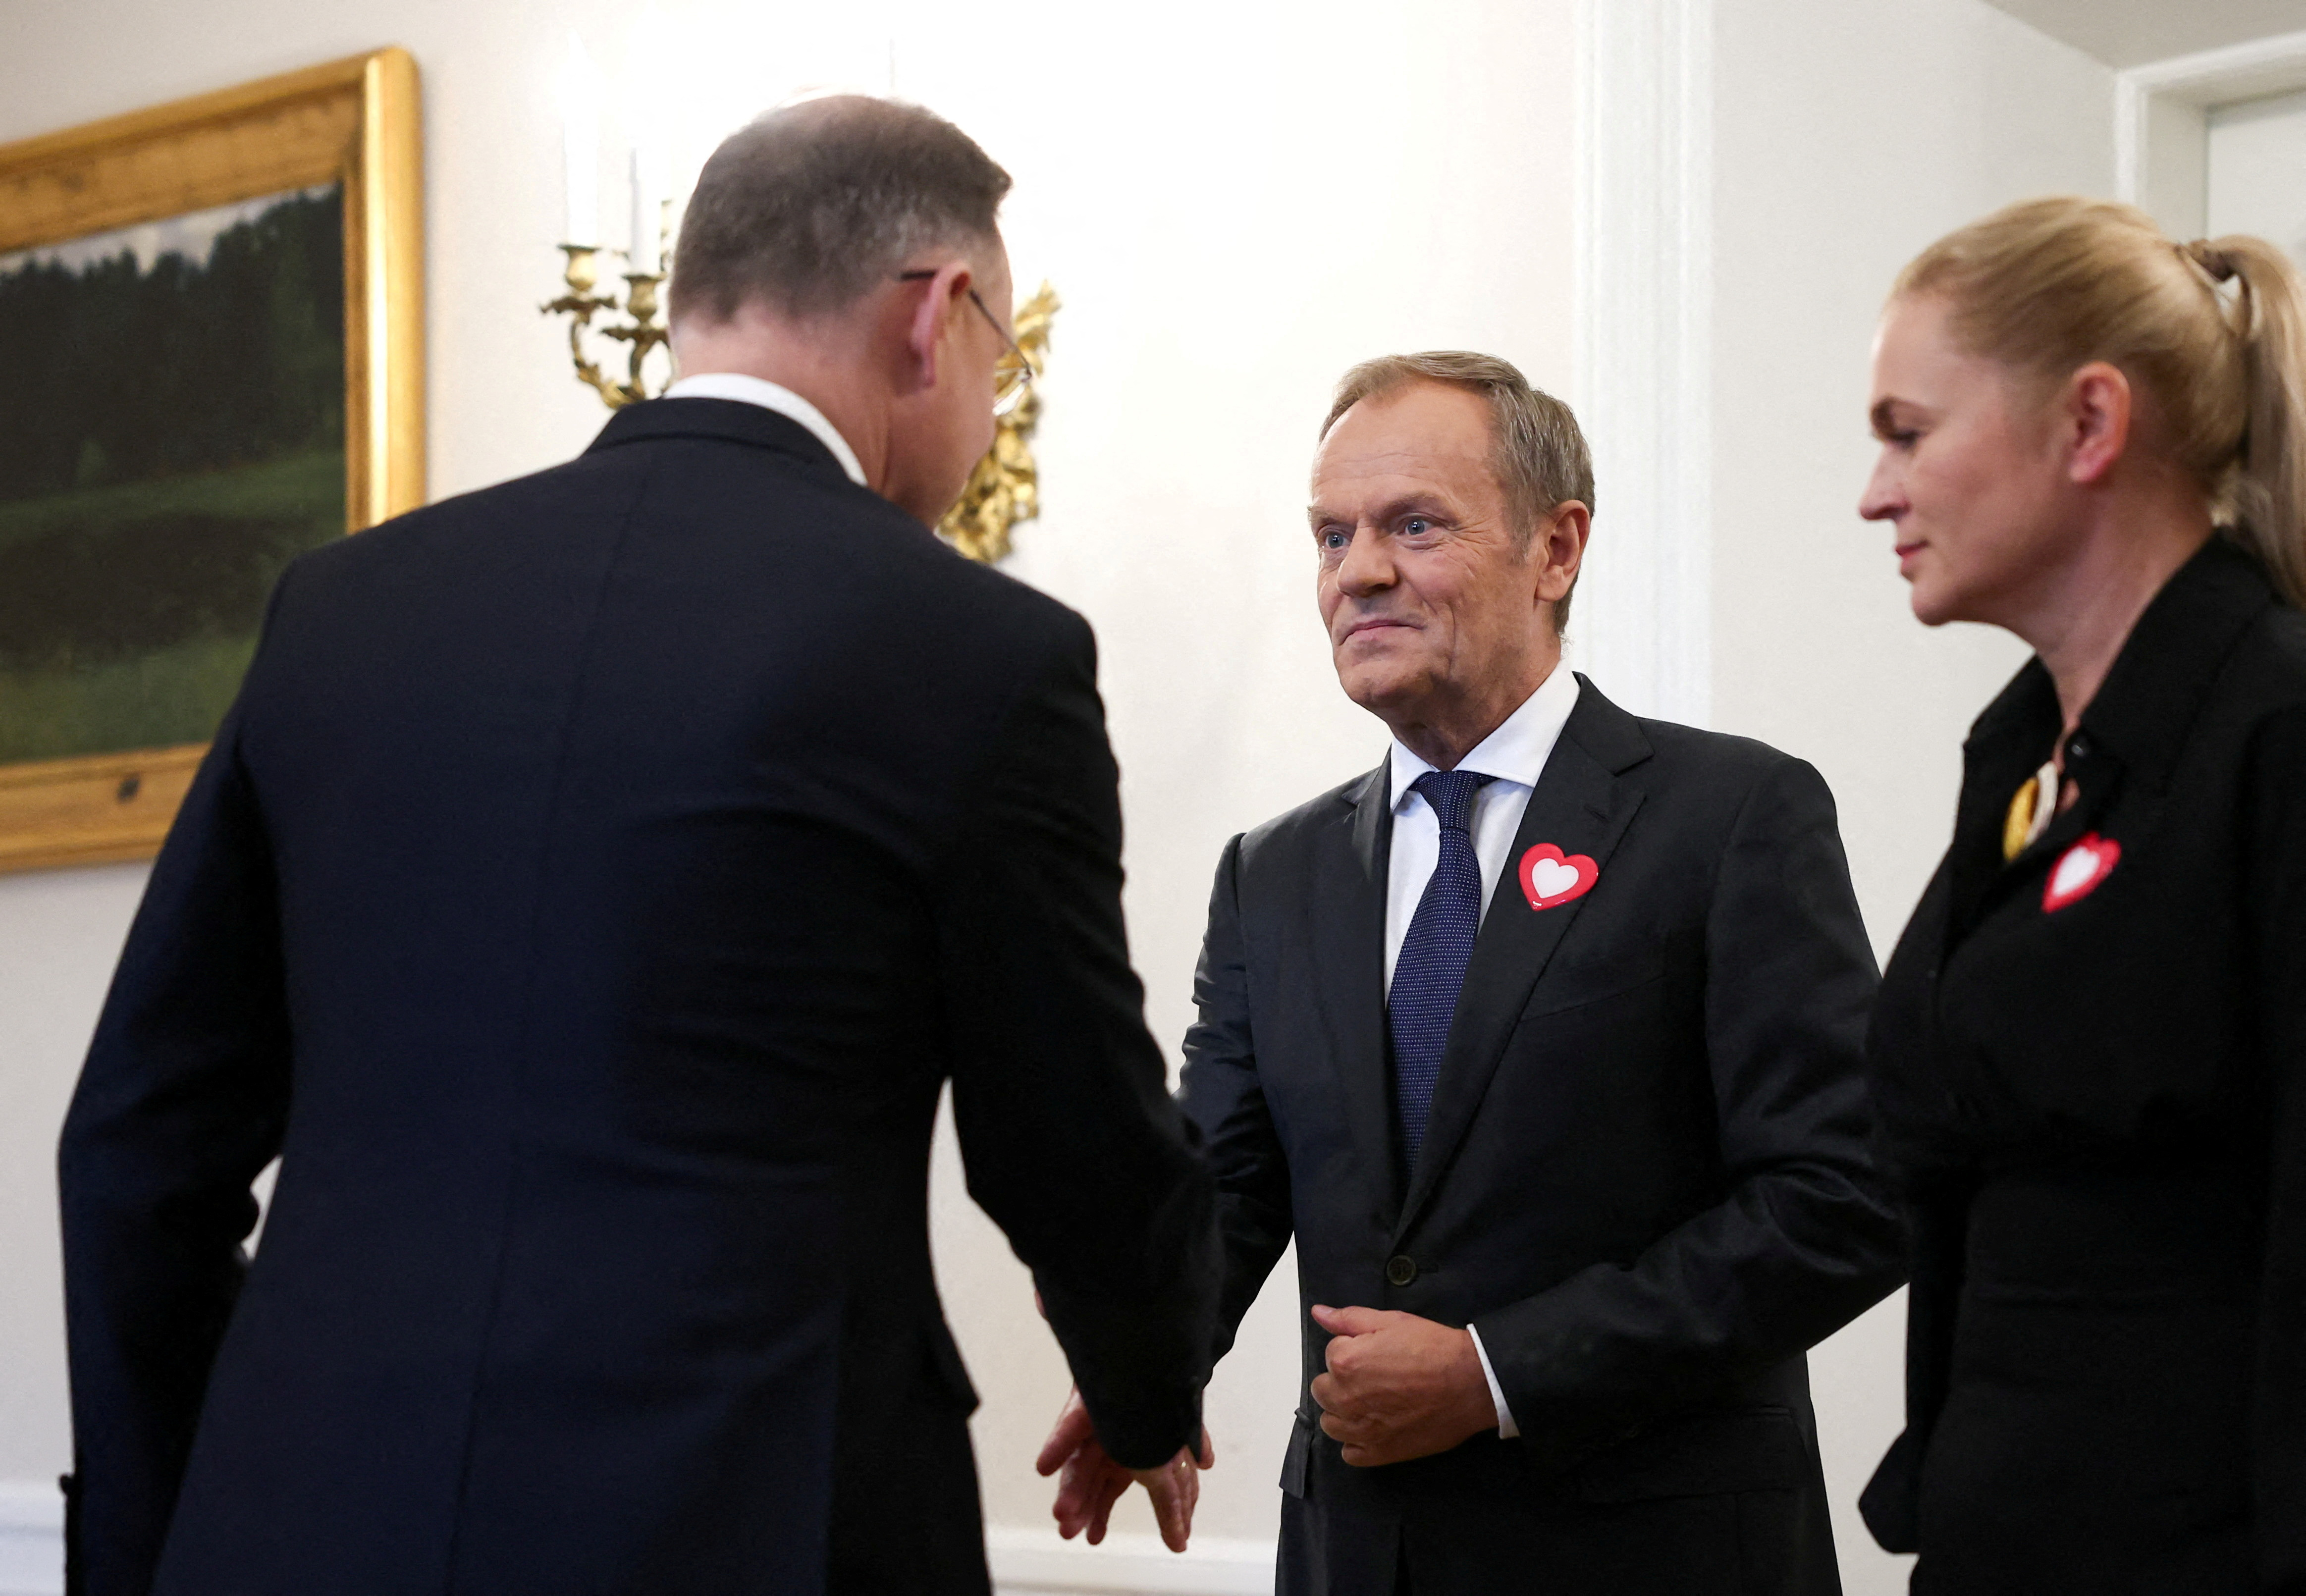 tusk act 4 greets the president of the united states : r